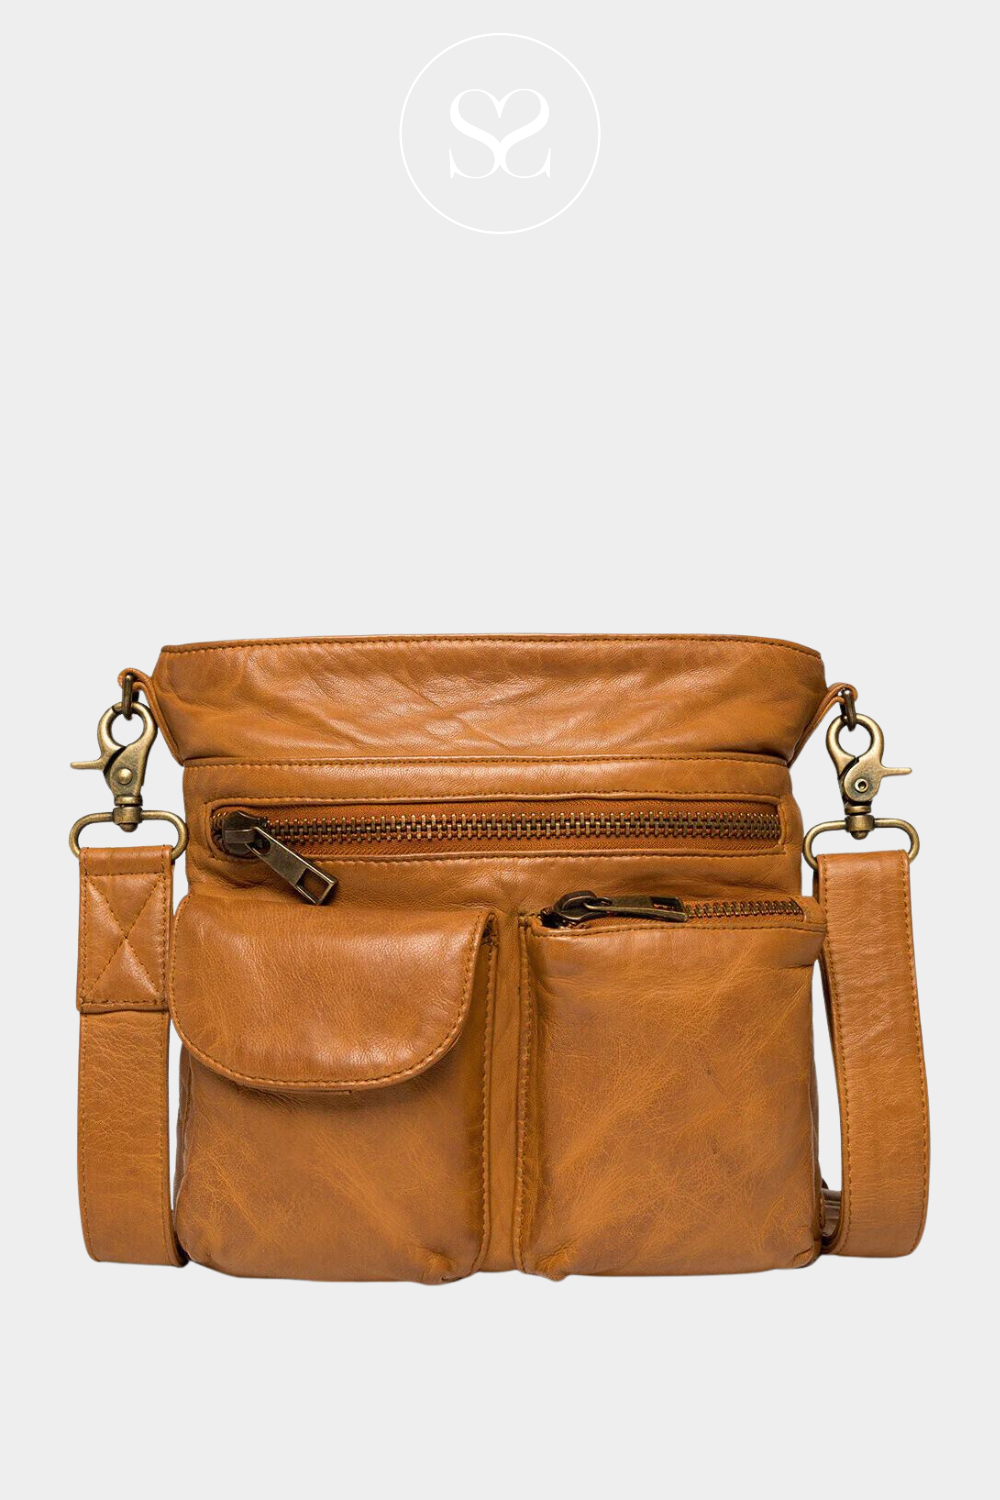 DEPECHE 15350 TAN LEATHER CROSSBODY BAG WITH ADJUSTABLE STRAP AND MULTIPLE ZIPPED POCKETS AND FRONT POCKETS FOR YOUR PHONE AND KEYS